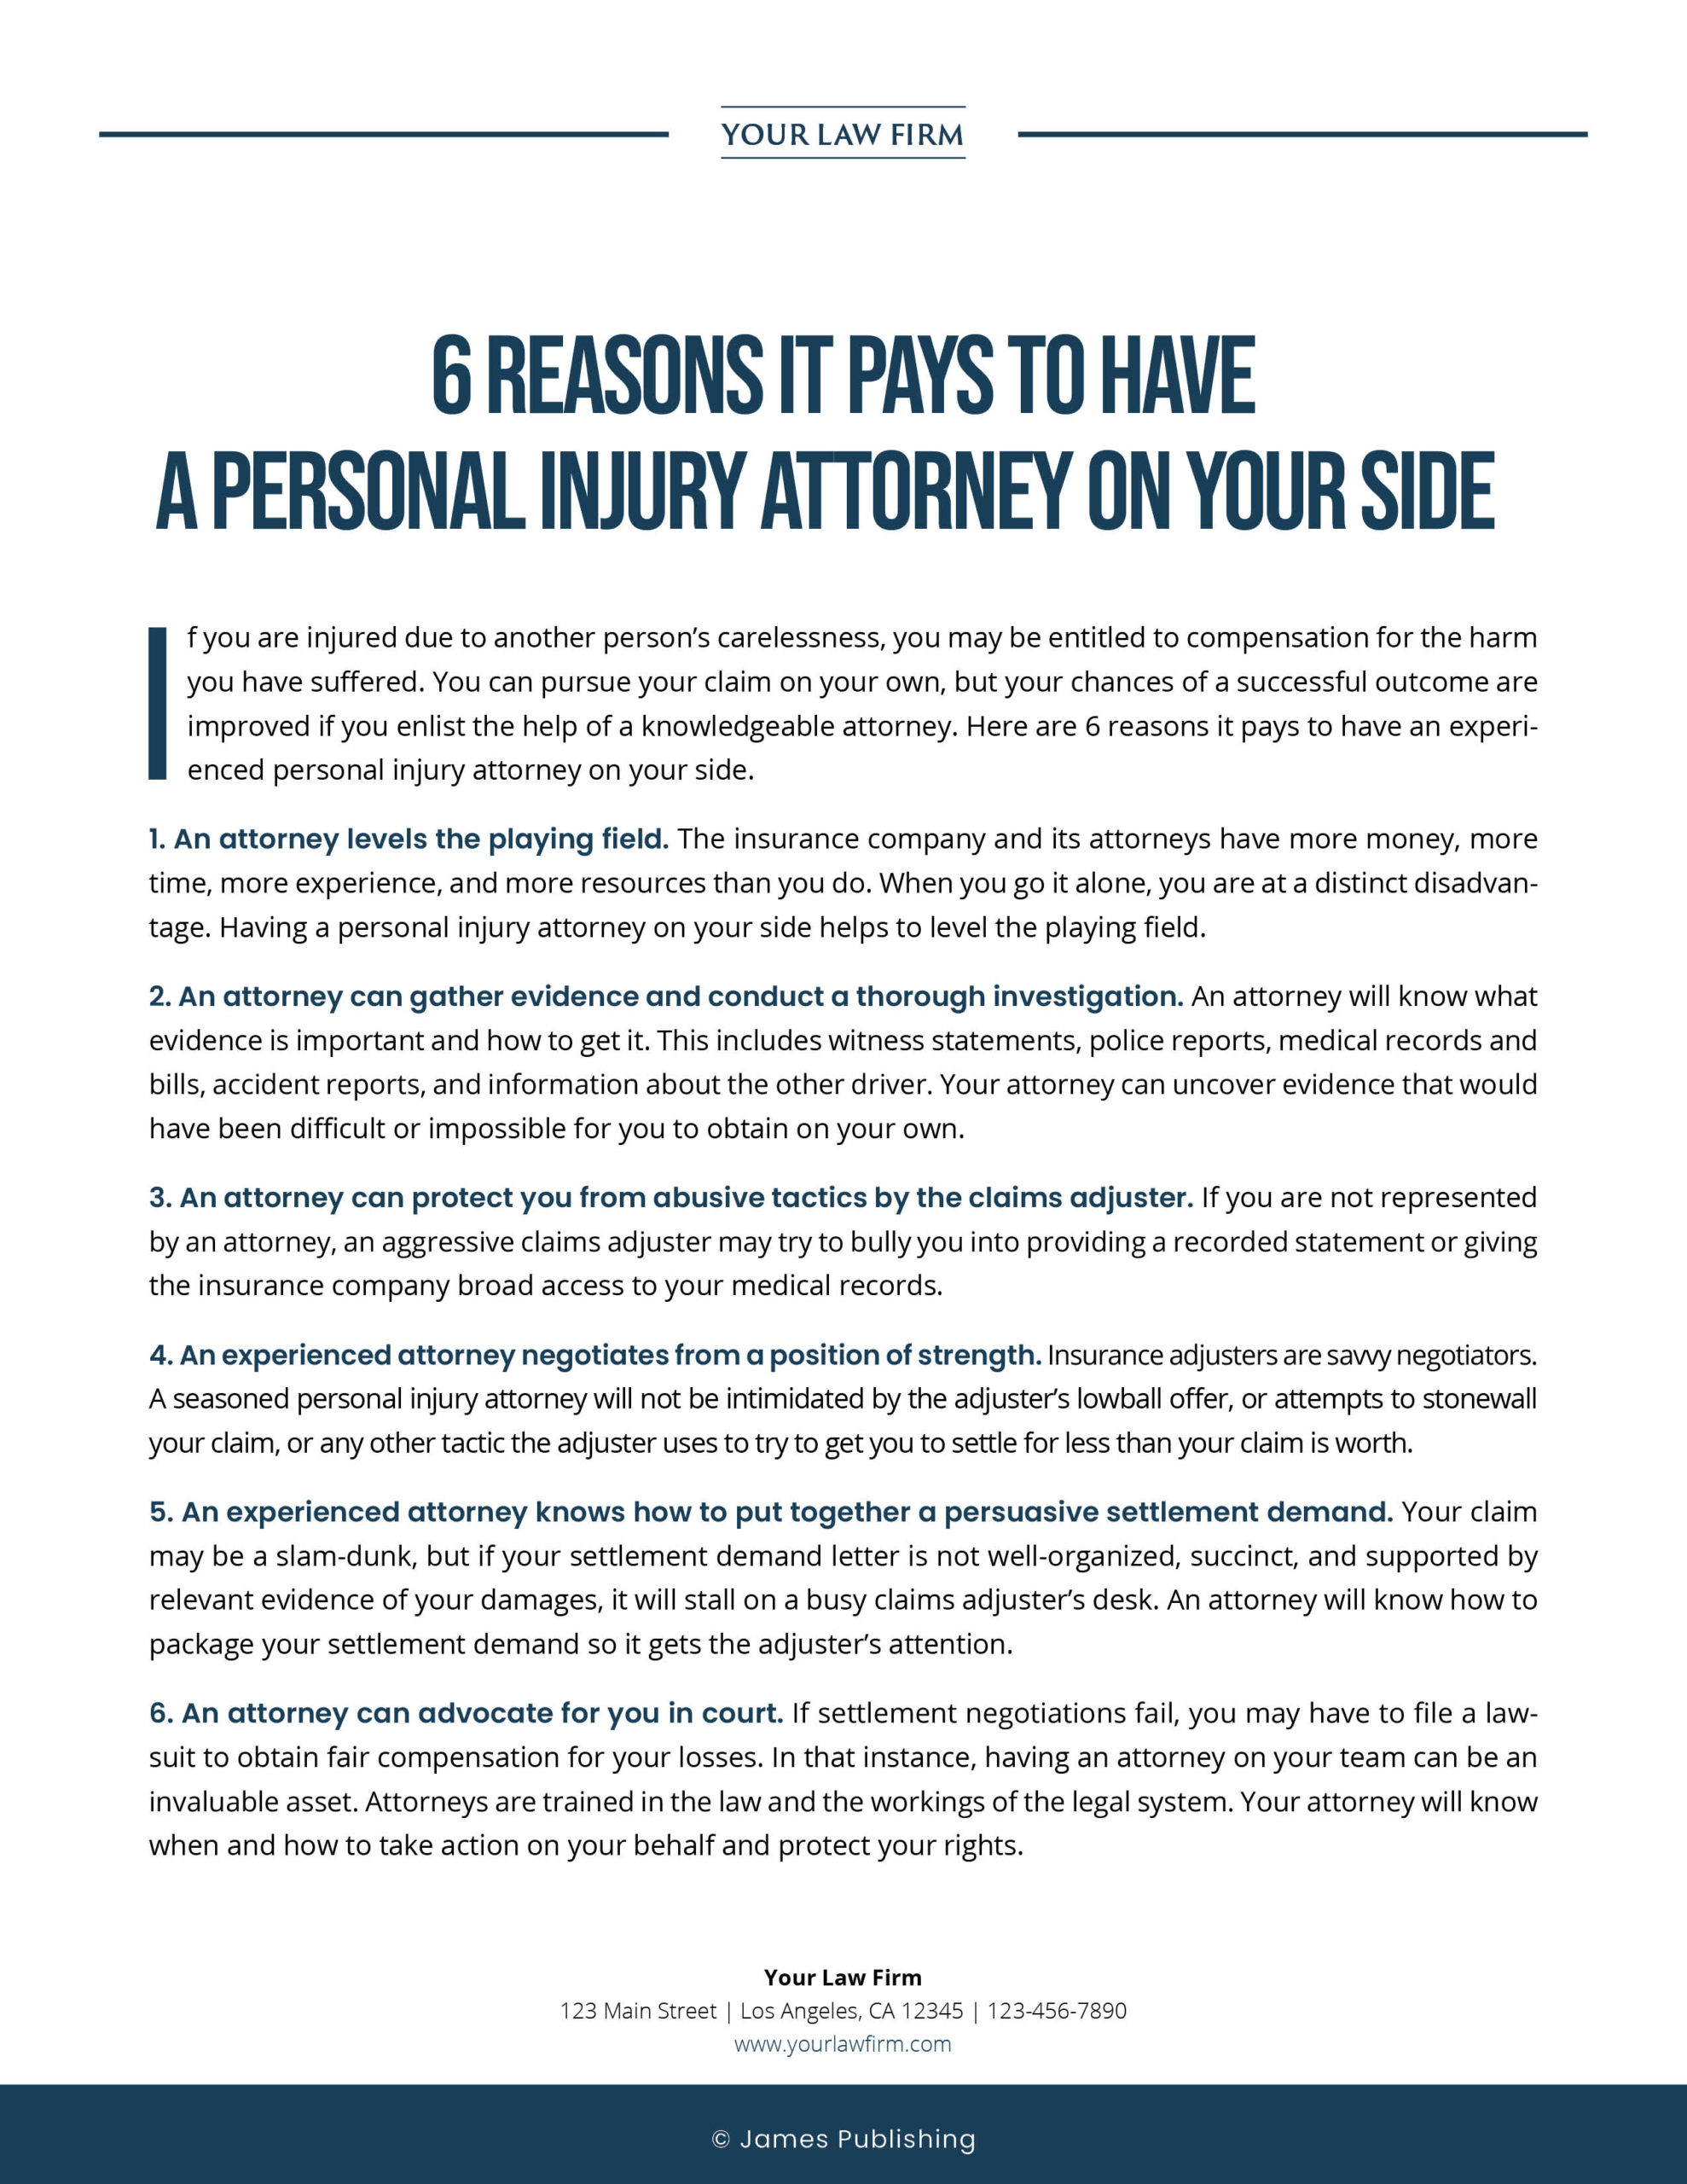 PI-07 6 Reasons It Pays to Have a Personal Injury Attorney on Your Side